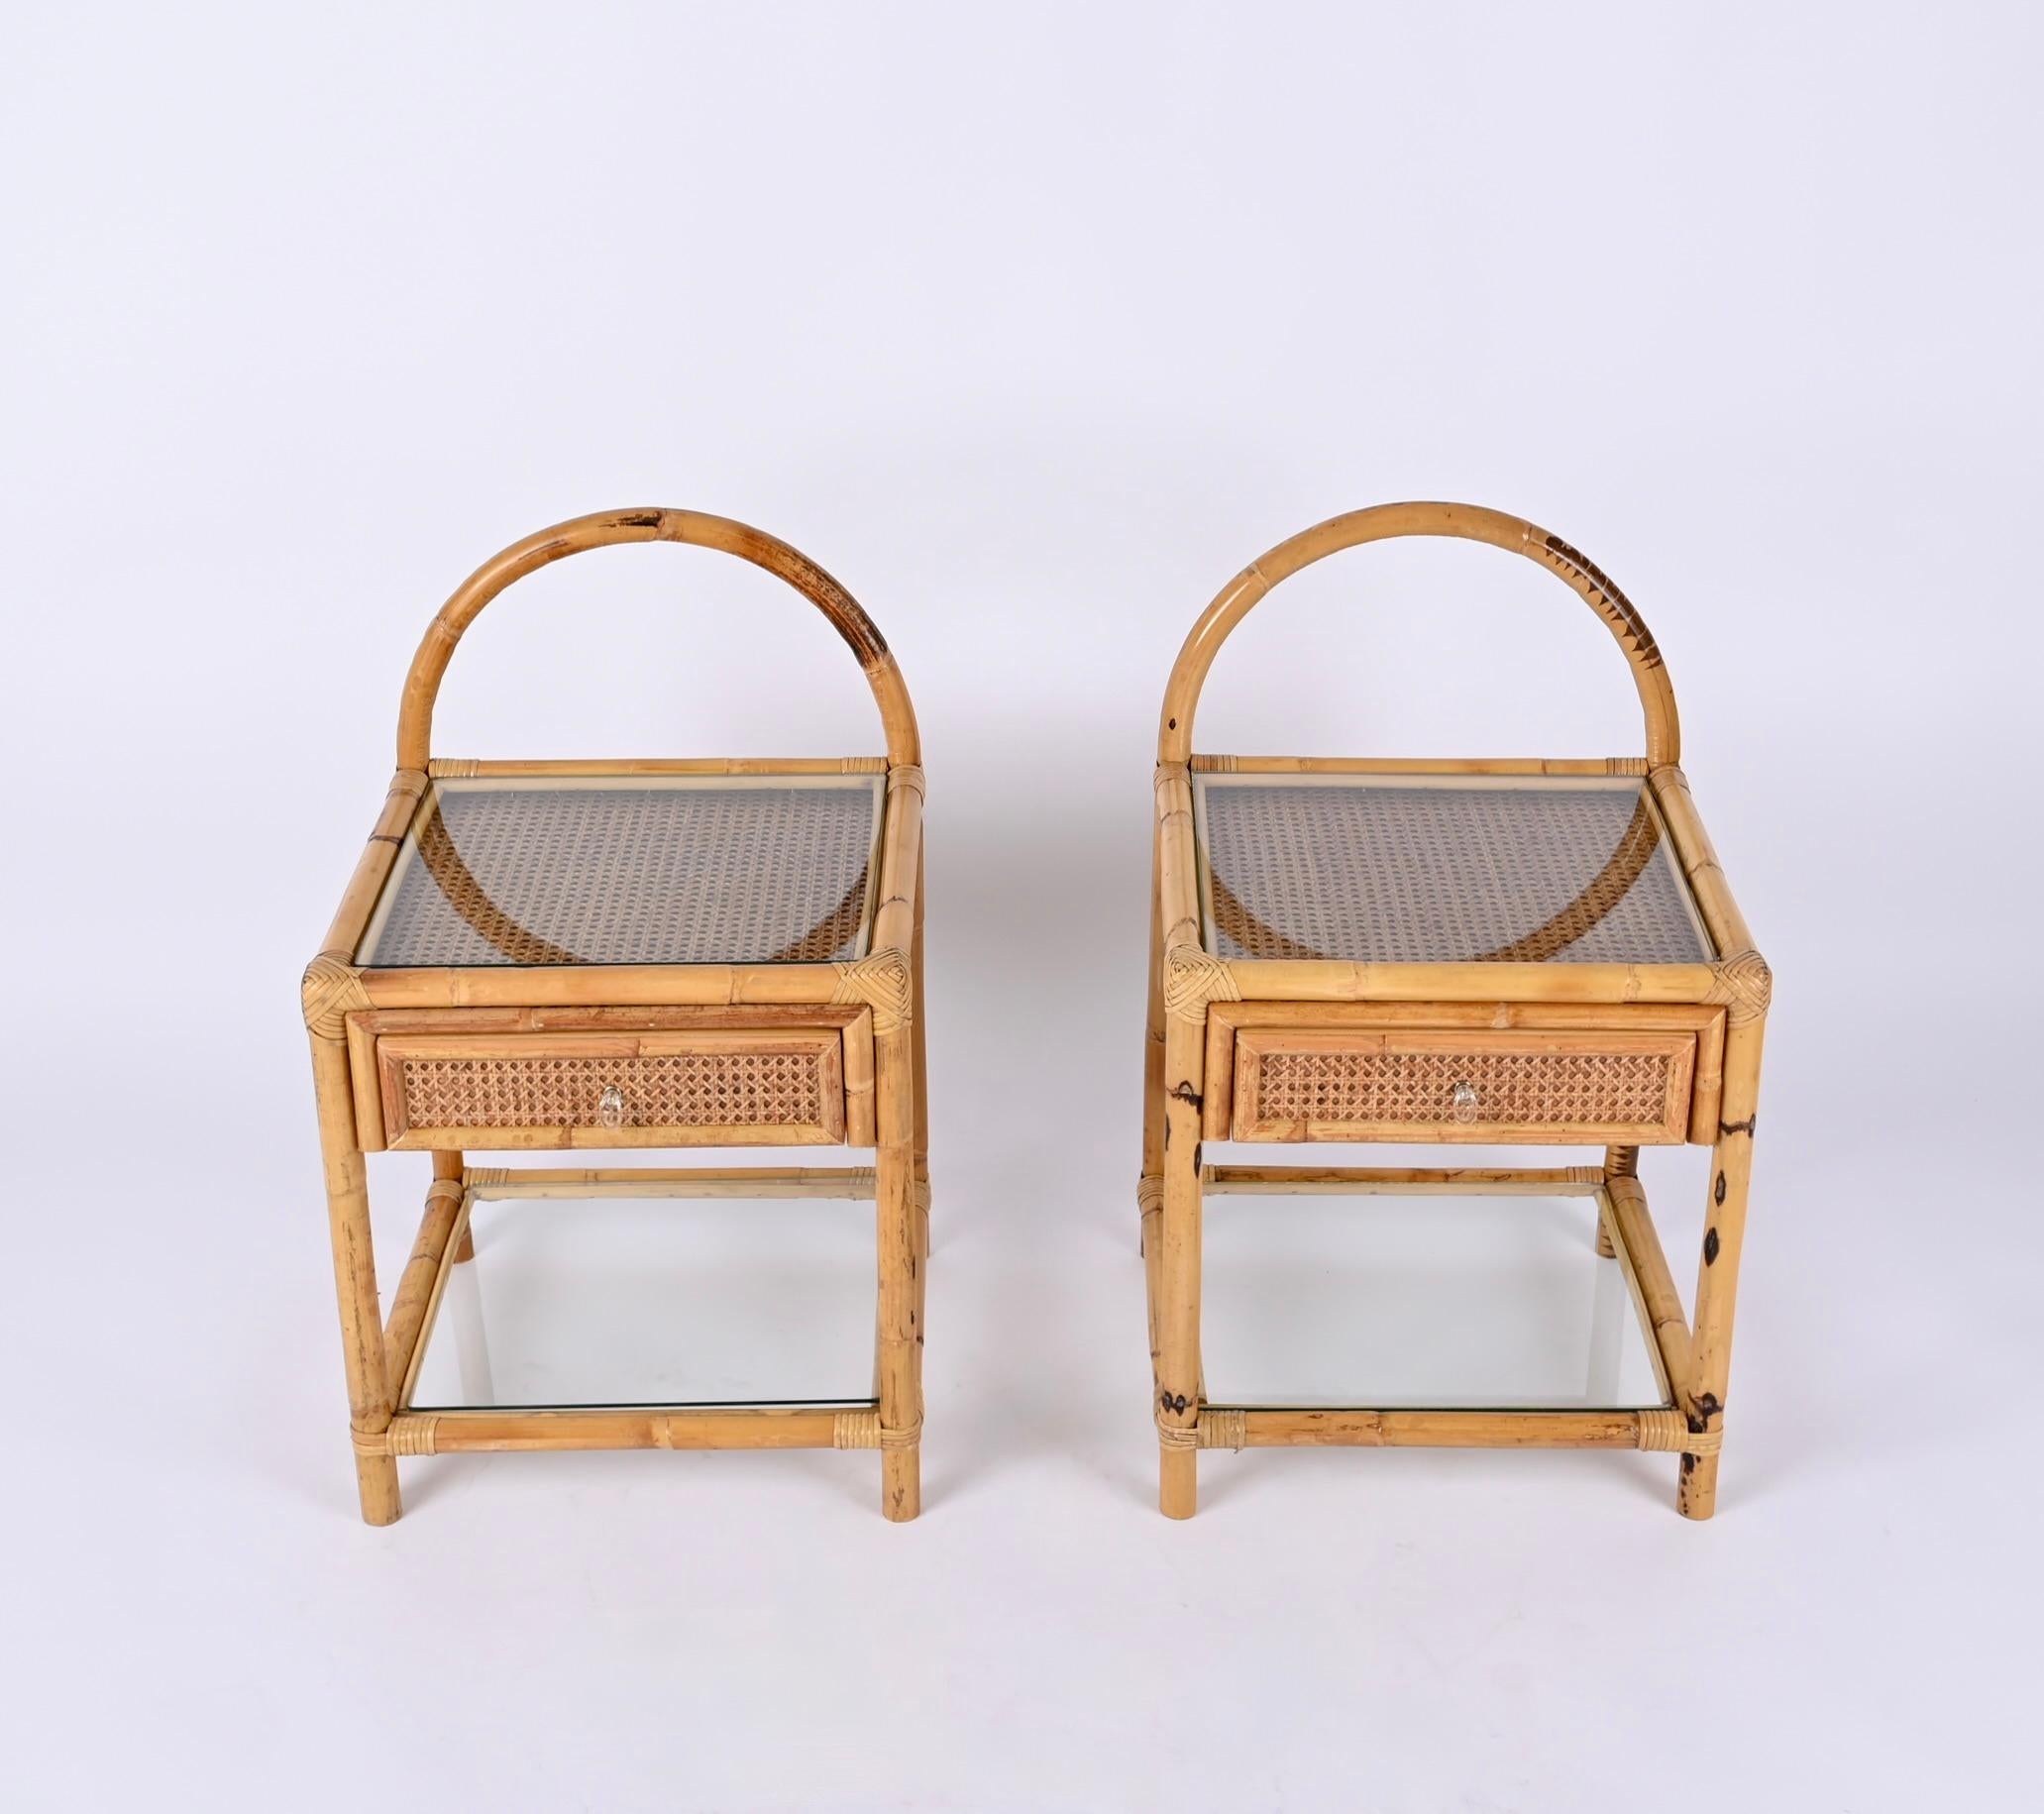 Pair of French Riviera Nightstands in Bamboo, Rattan and Straw, Italy 1970s For Sale 6